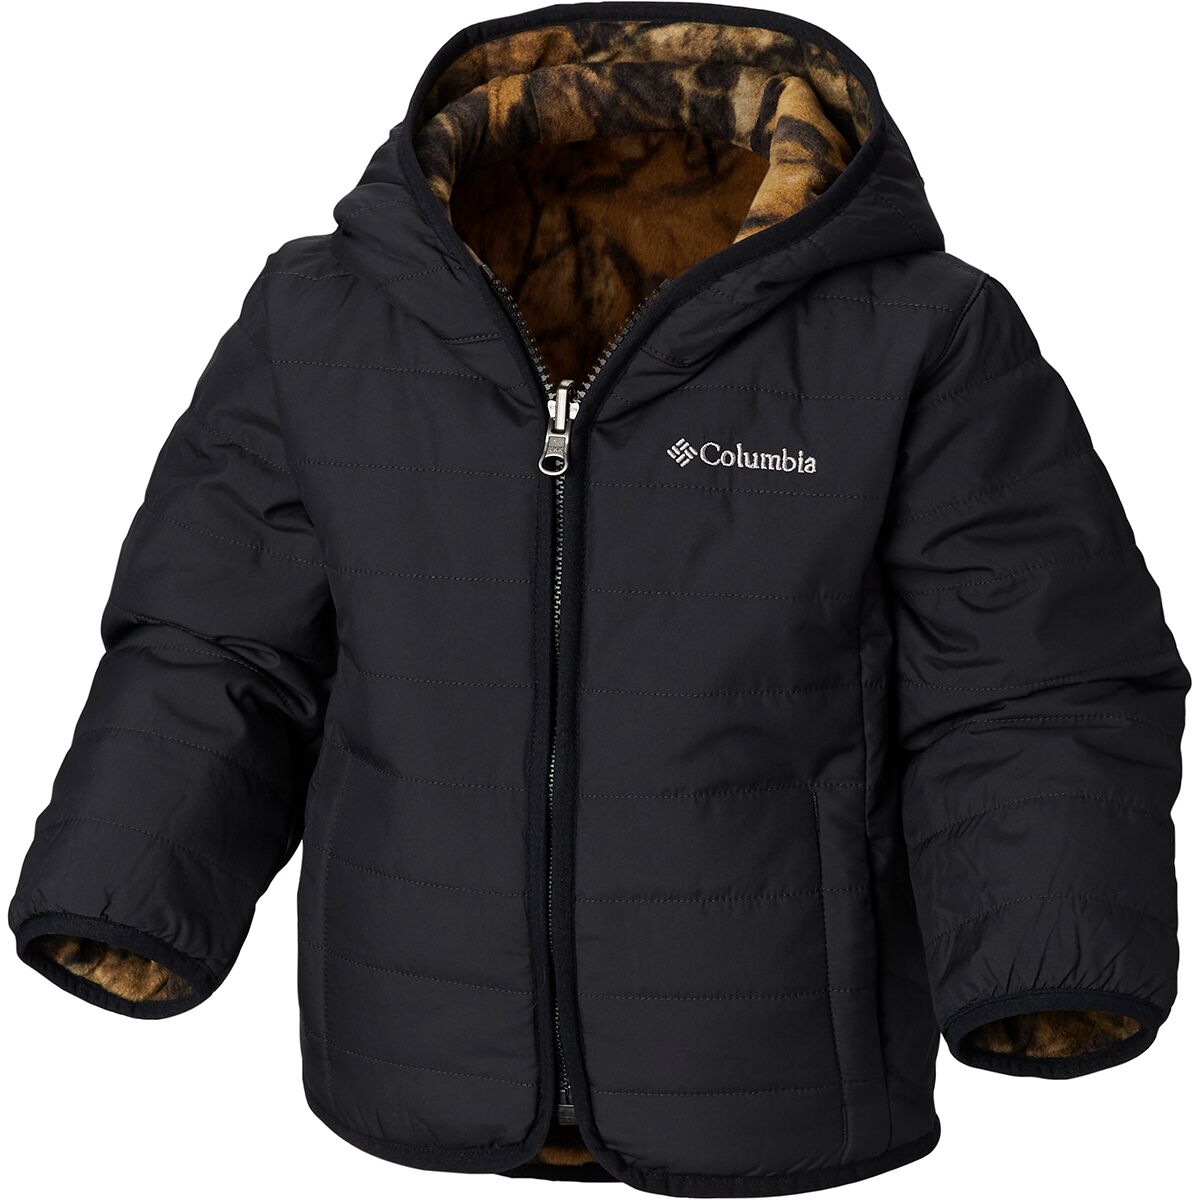 Columbia Double Trouble Jacket - Toddlers' - Kids